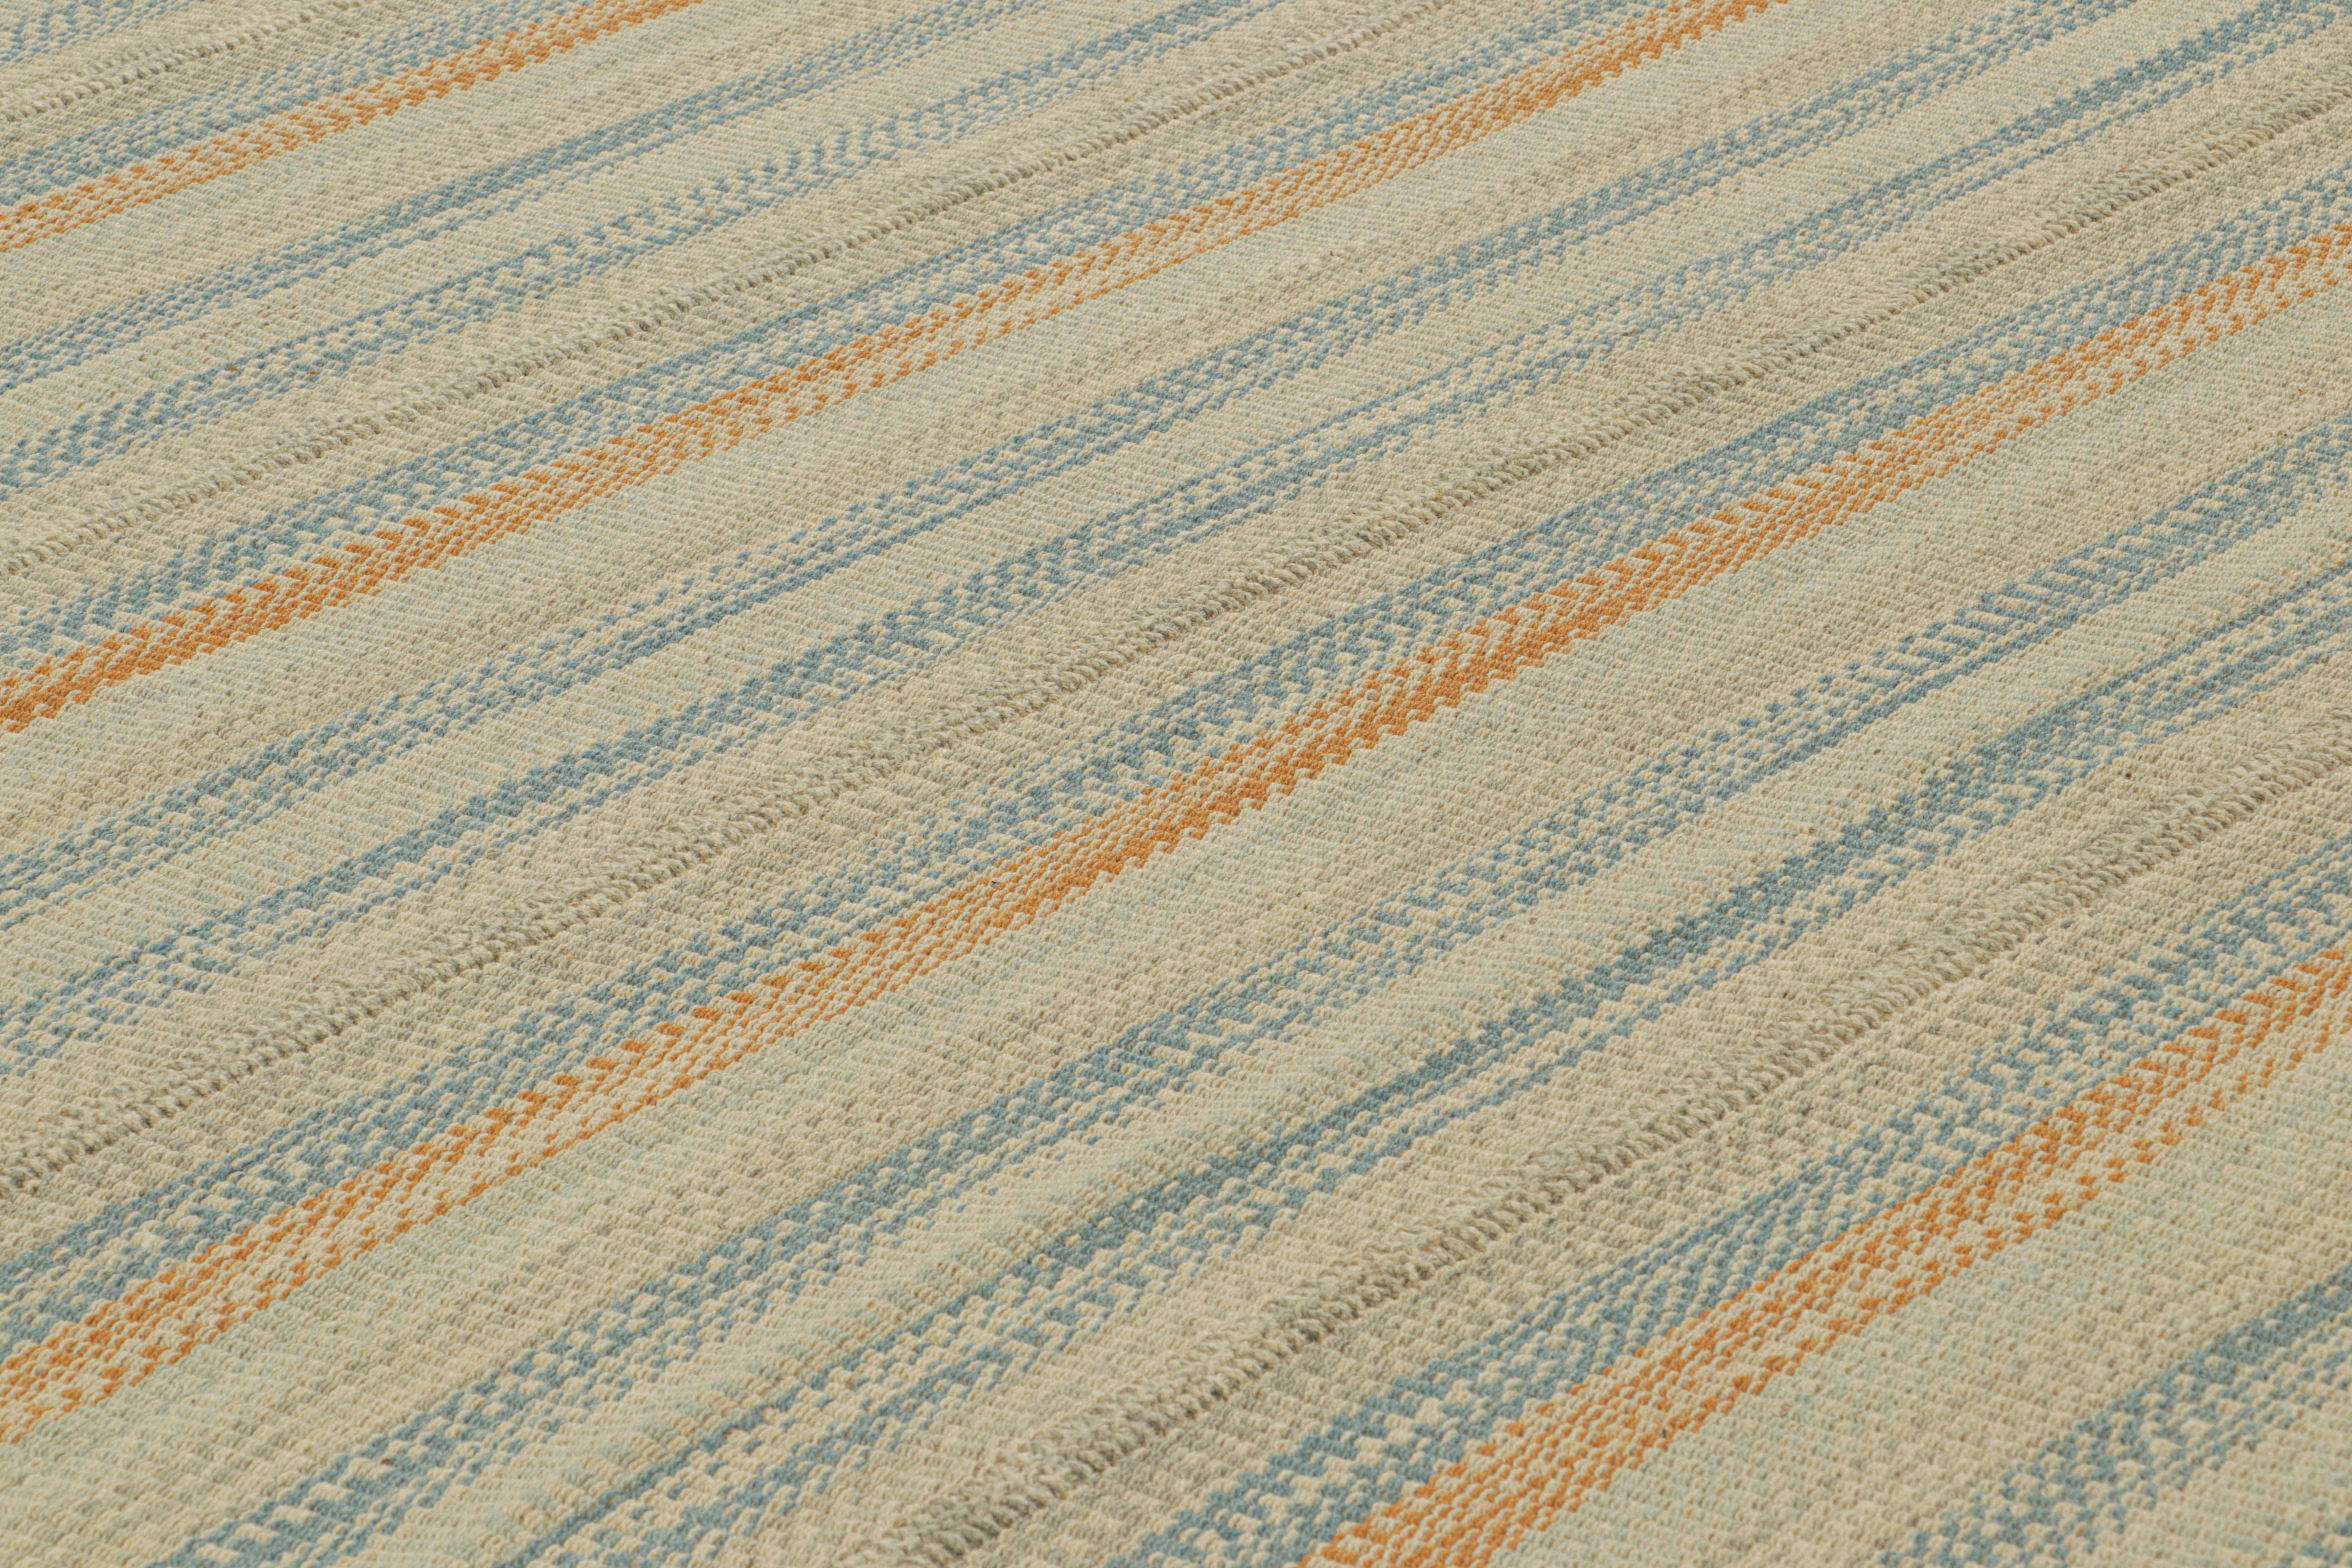 Handwoven in wool, a 9x12 Kilim design from an inventive new contemporary flat weave collection by Rug & Kilim.

On the Design: 

Fondly dubbed, “Rez Kilims”, this modern take on classic panel-weaving enjoys a fabulous, unique play of light beige,